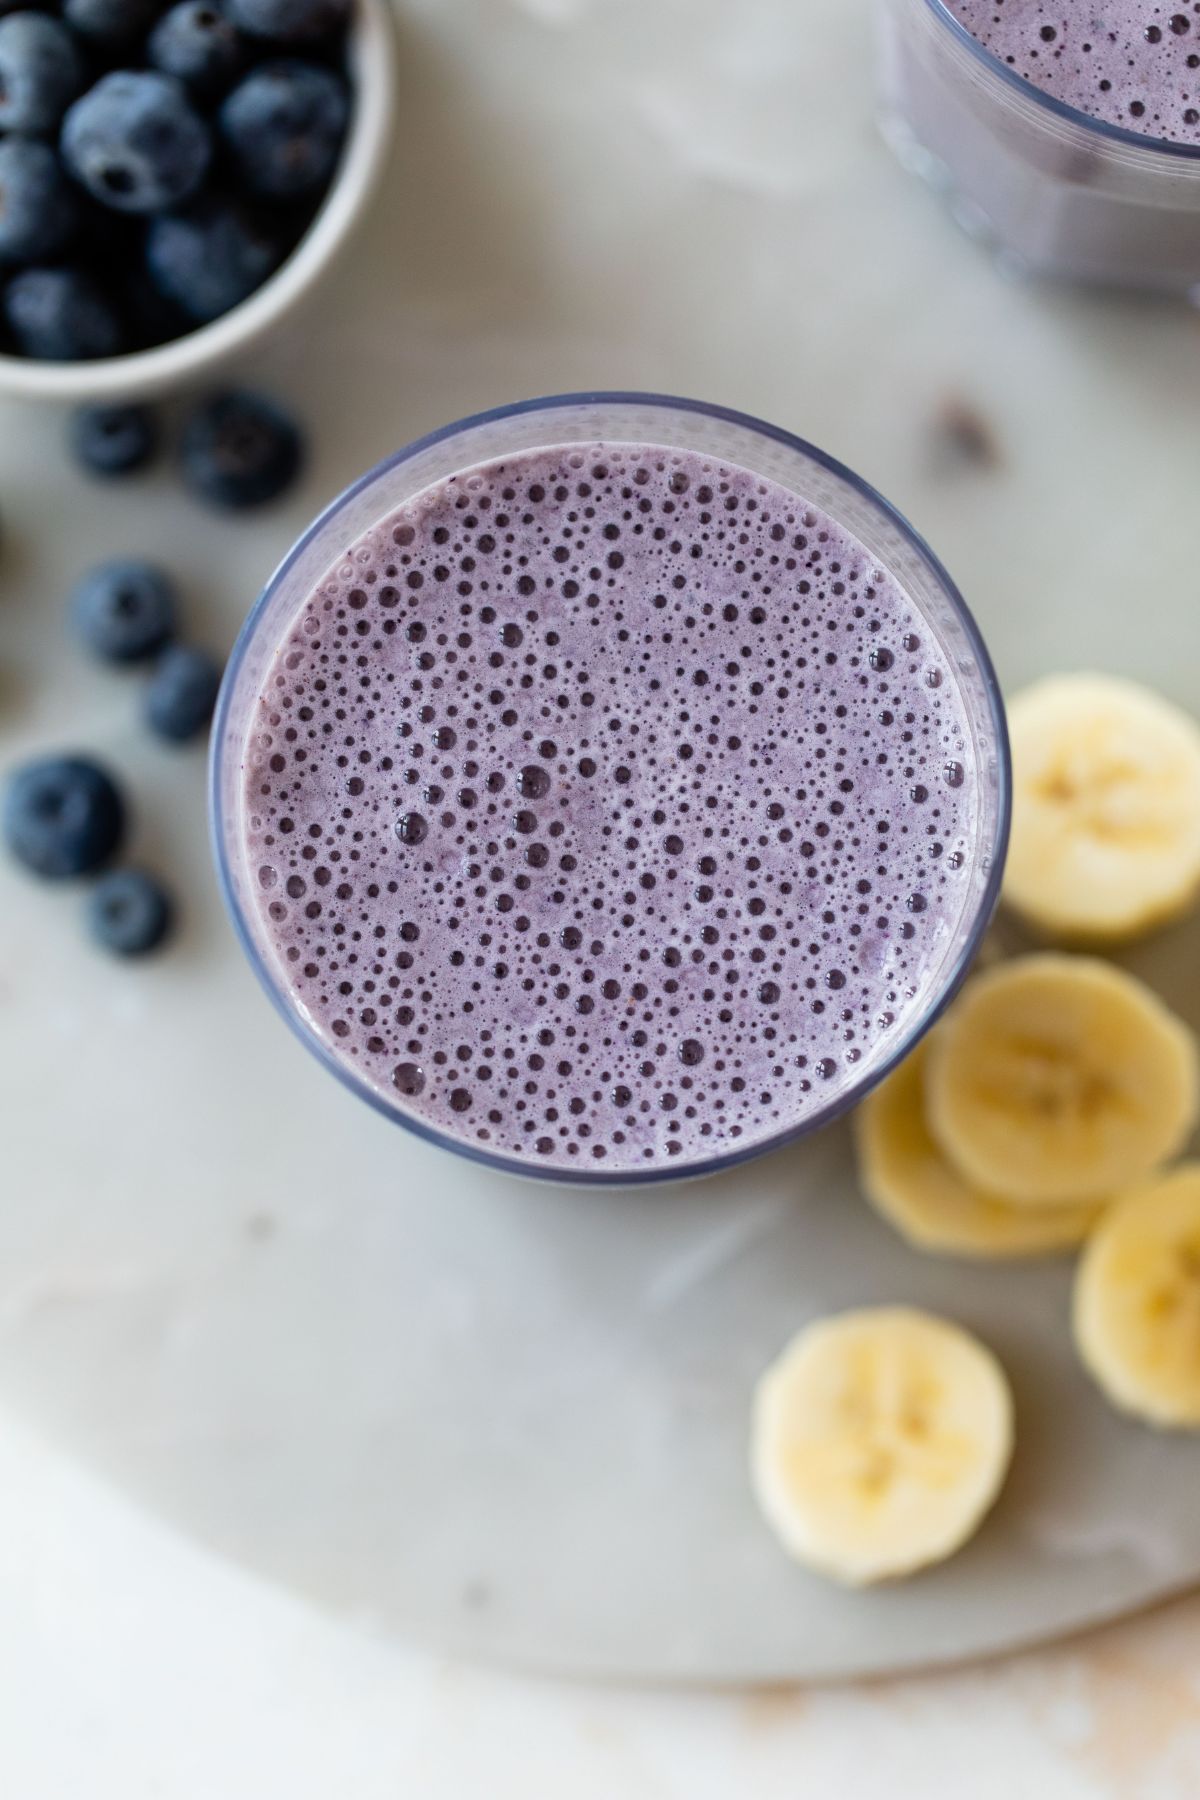 A blueberry smoothie near fresh blueberries and banana slices.